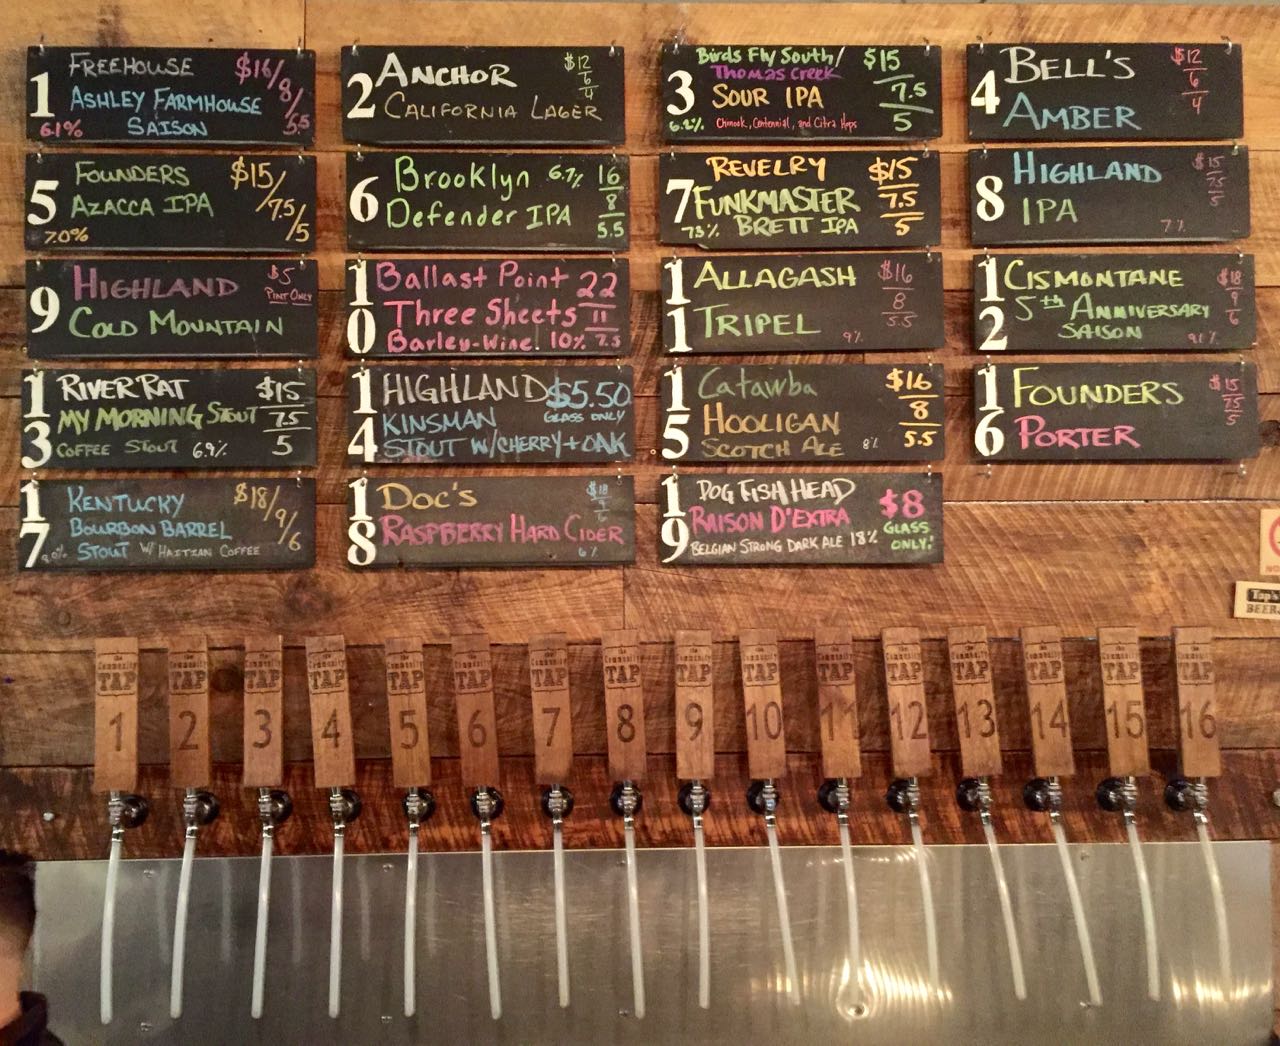 Greenville - The Community Tap taps